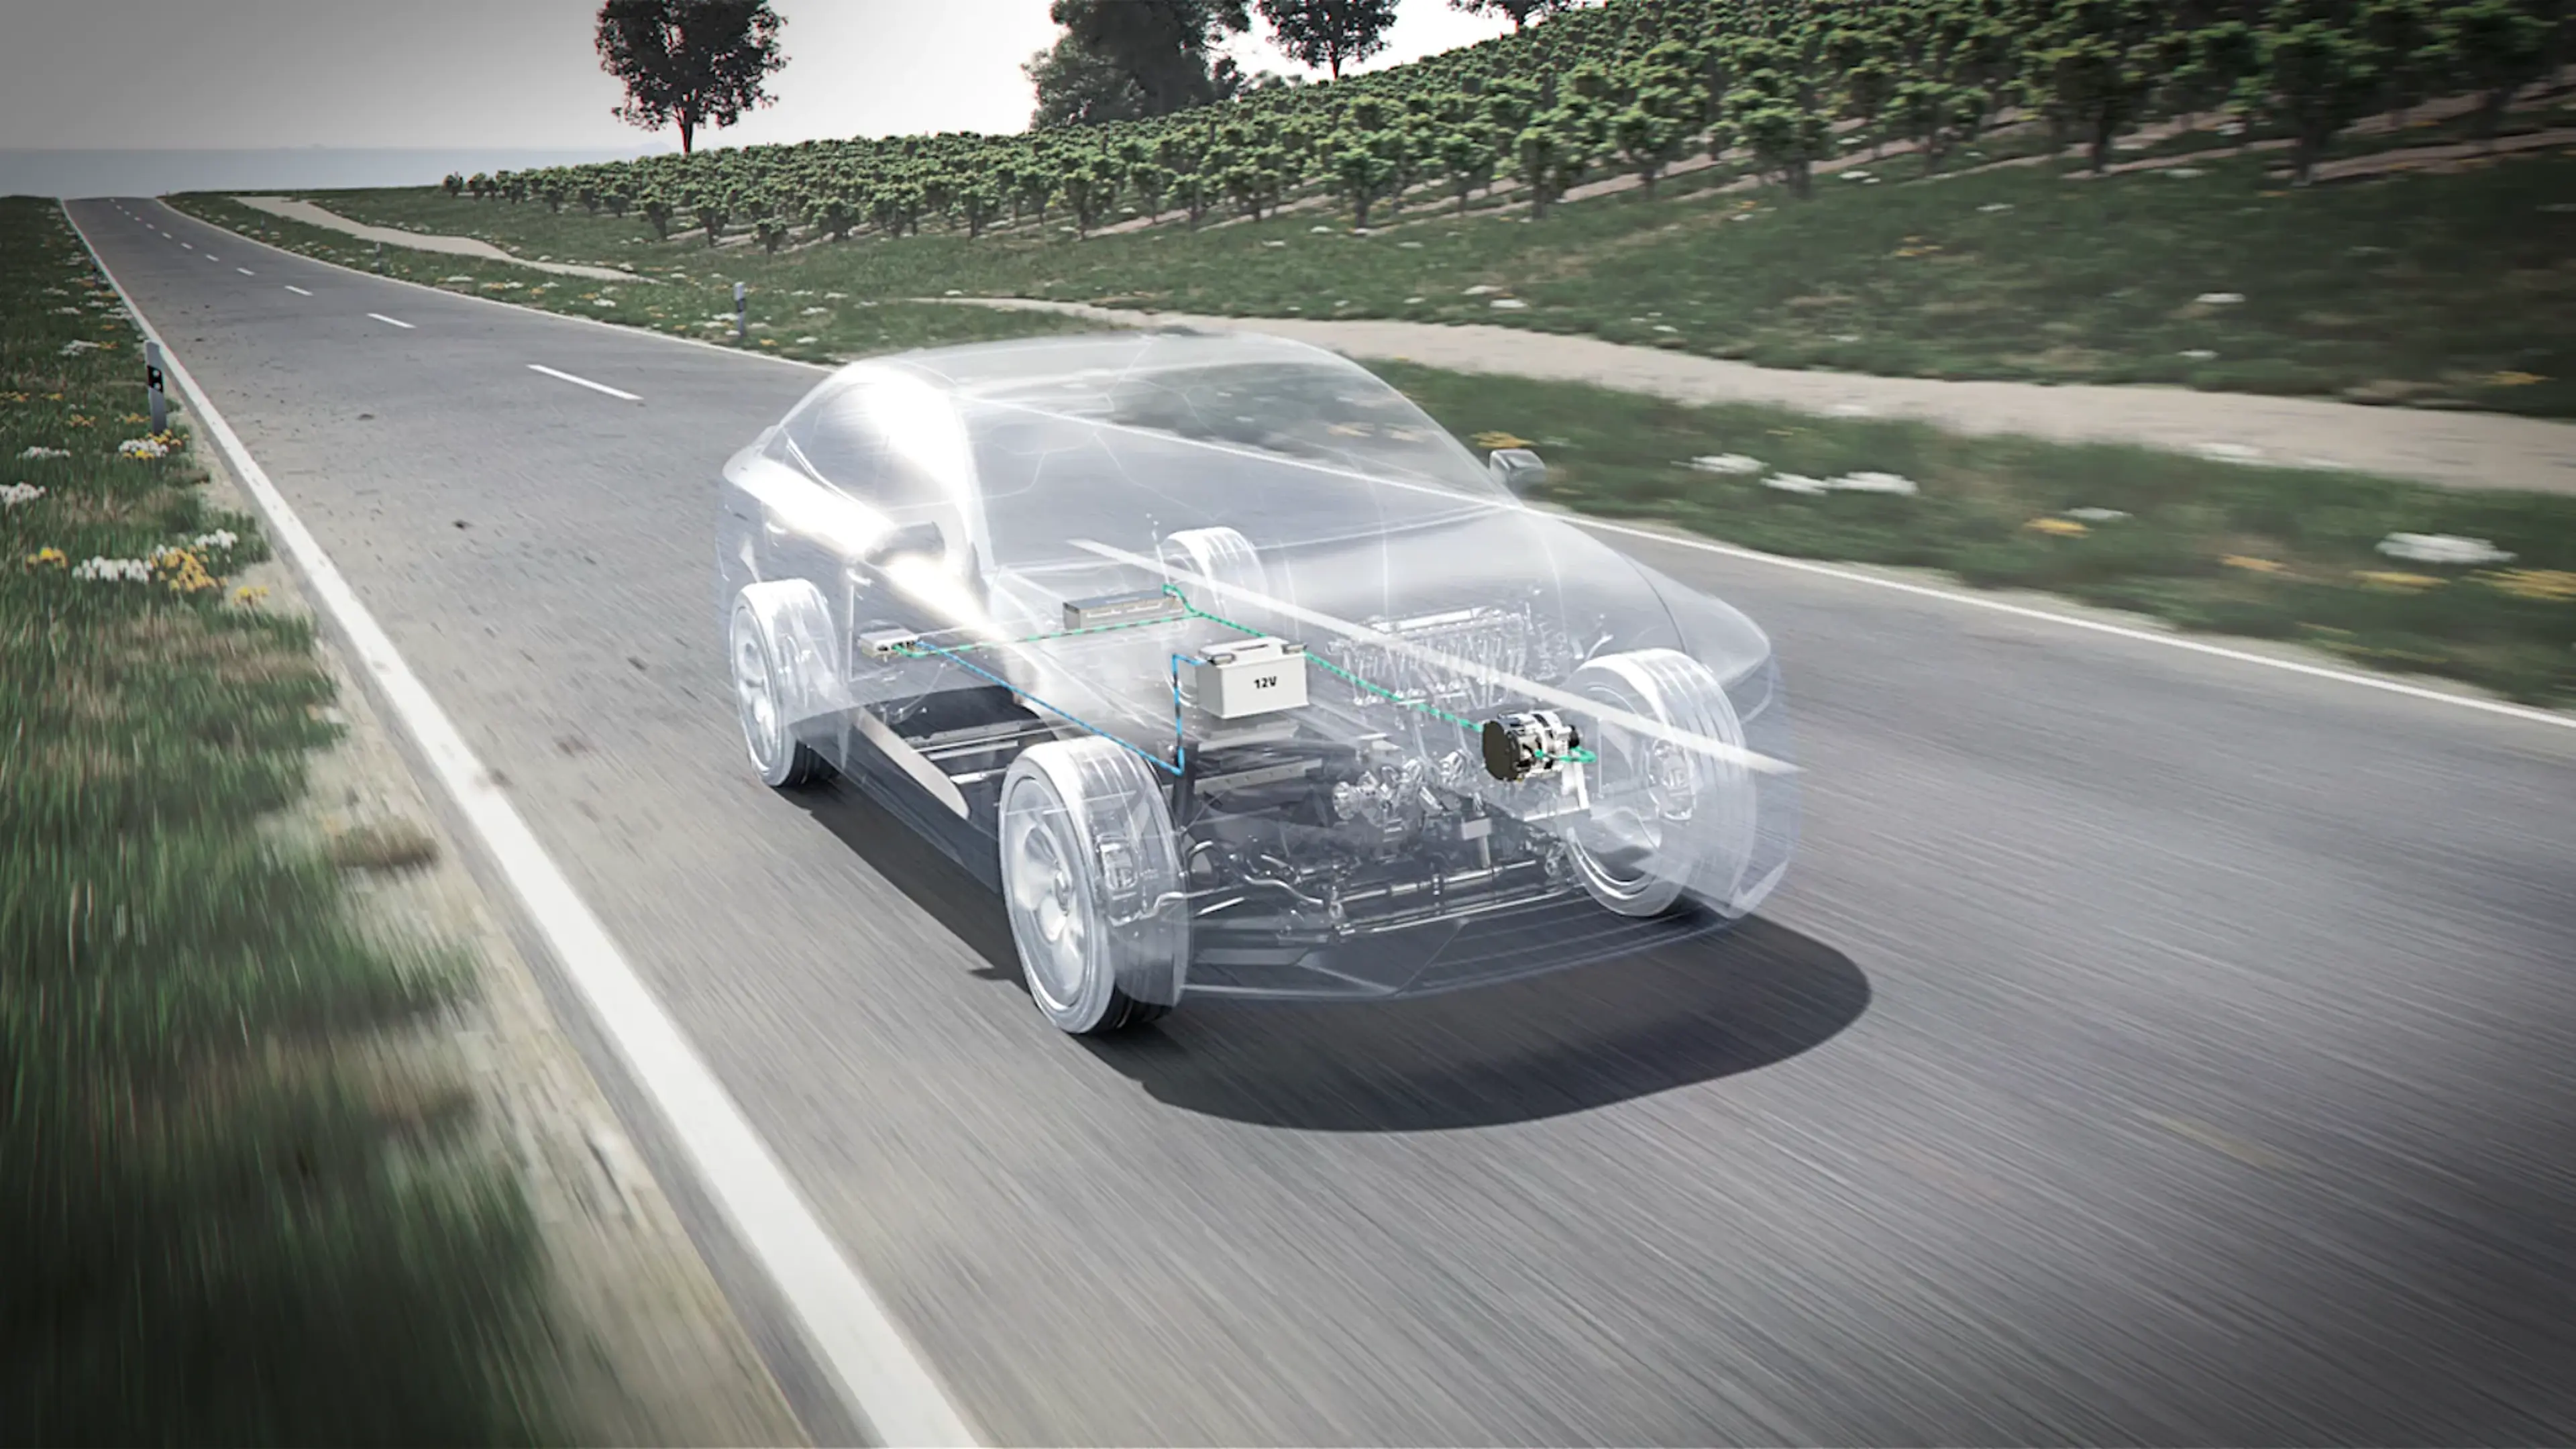 Rendering: Glass vehicle with 48V/mild hybrid drive technology on road